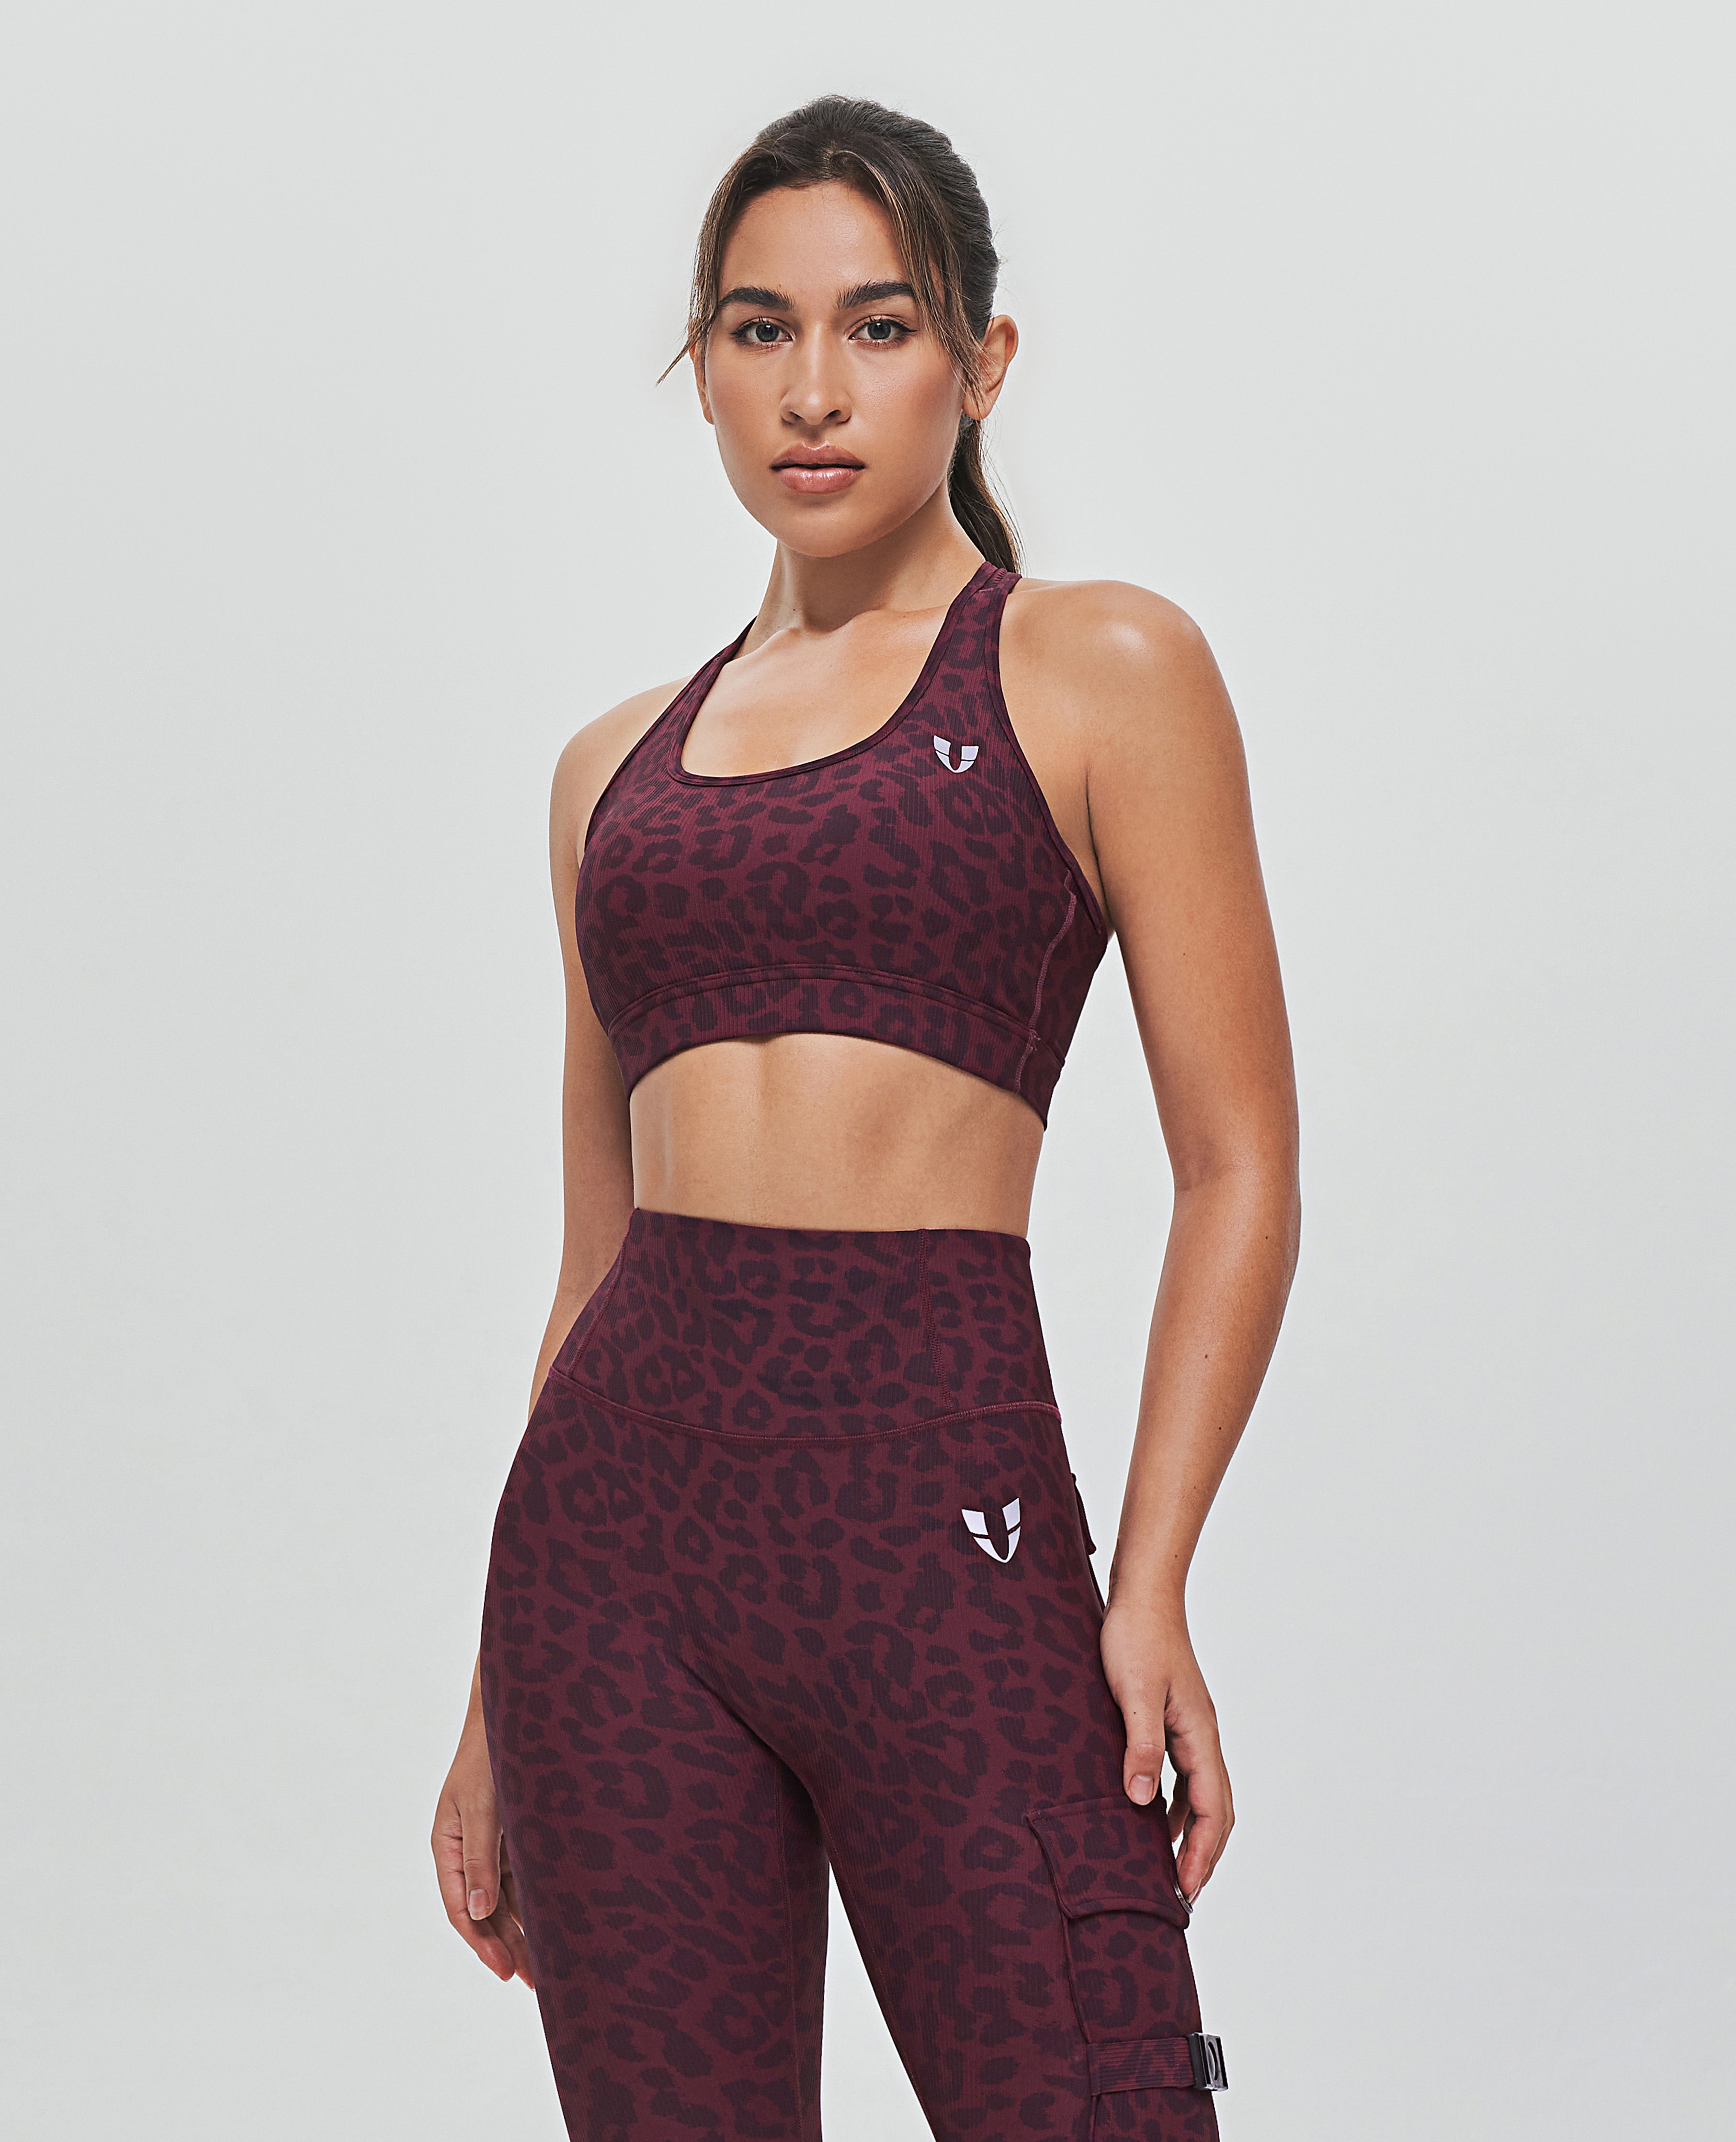 FIRM ABS - Do you love the zip design or more basic styles for sports bras?  ZIP UP SPORTS BRA:  CORE LEGGINGS Pro:   #firmabs #firmabswomen #workoutwithfirmabs - - - - #